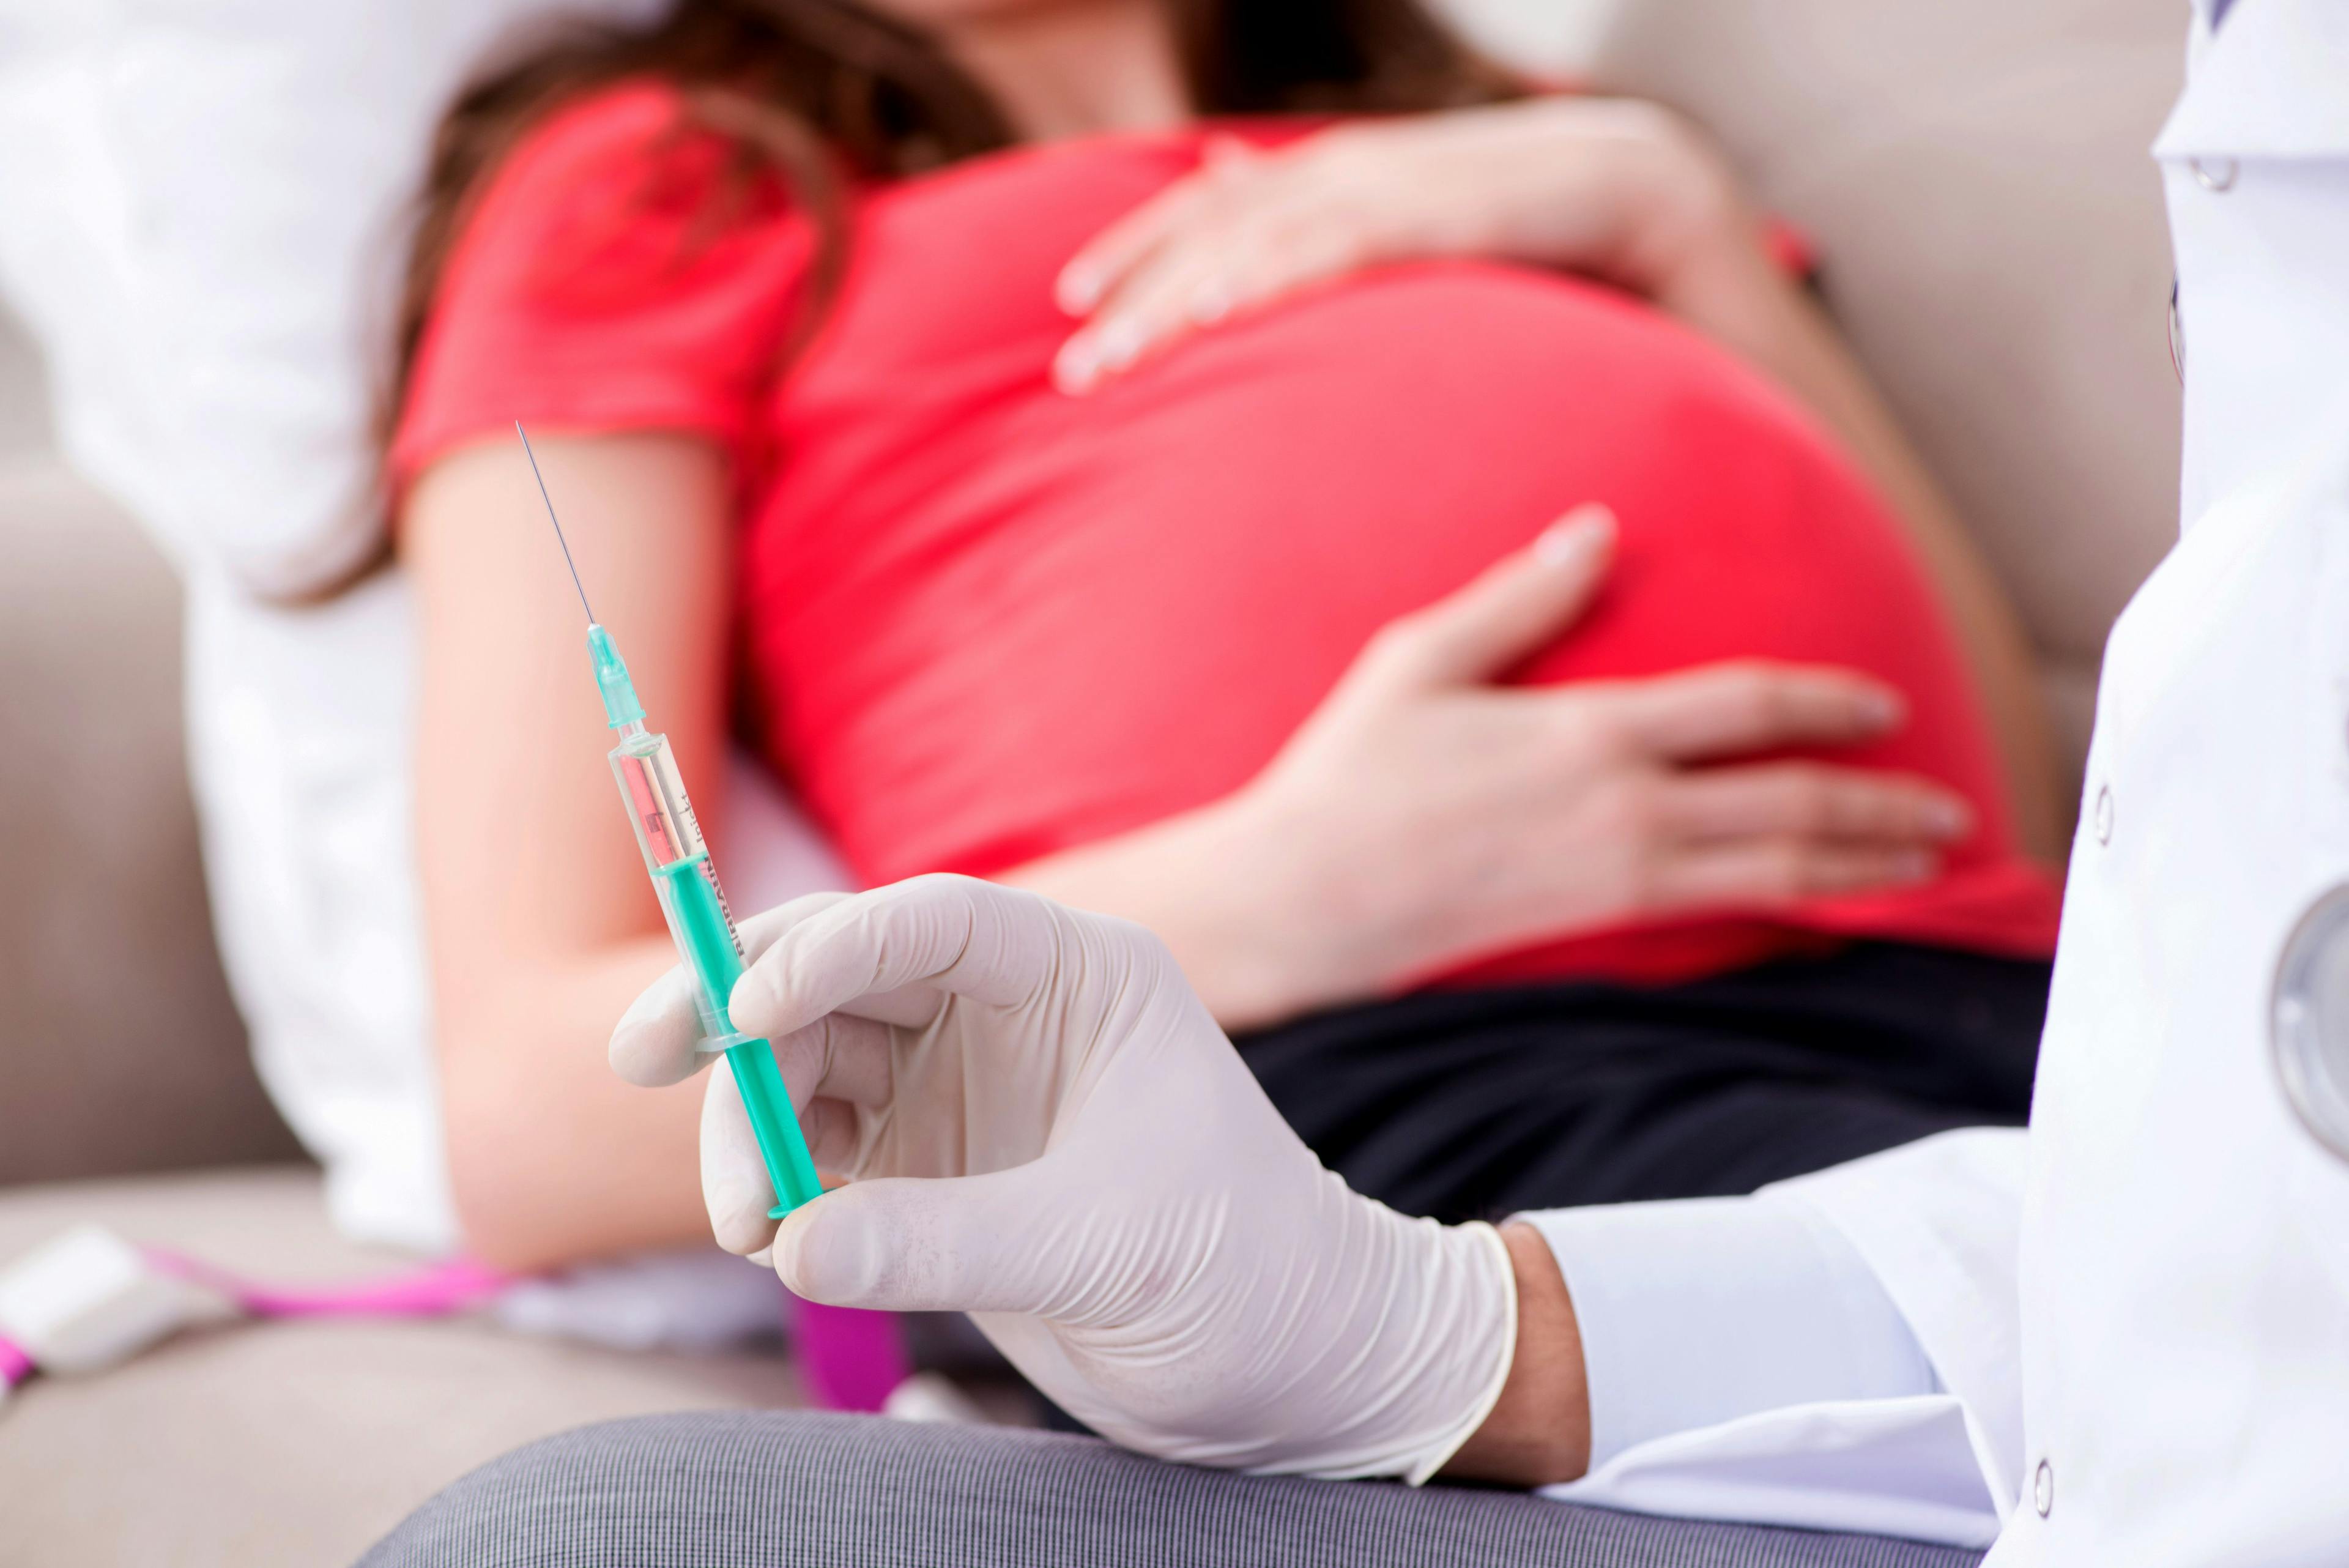 FDA approves Tdap vaccine for use during pregnancy to prevent whooping cough